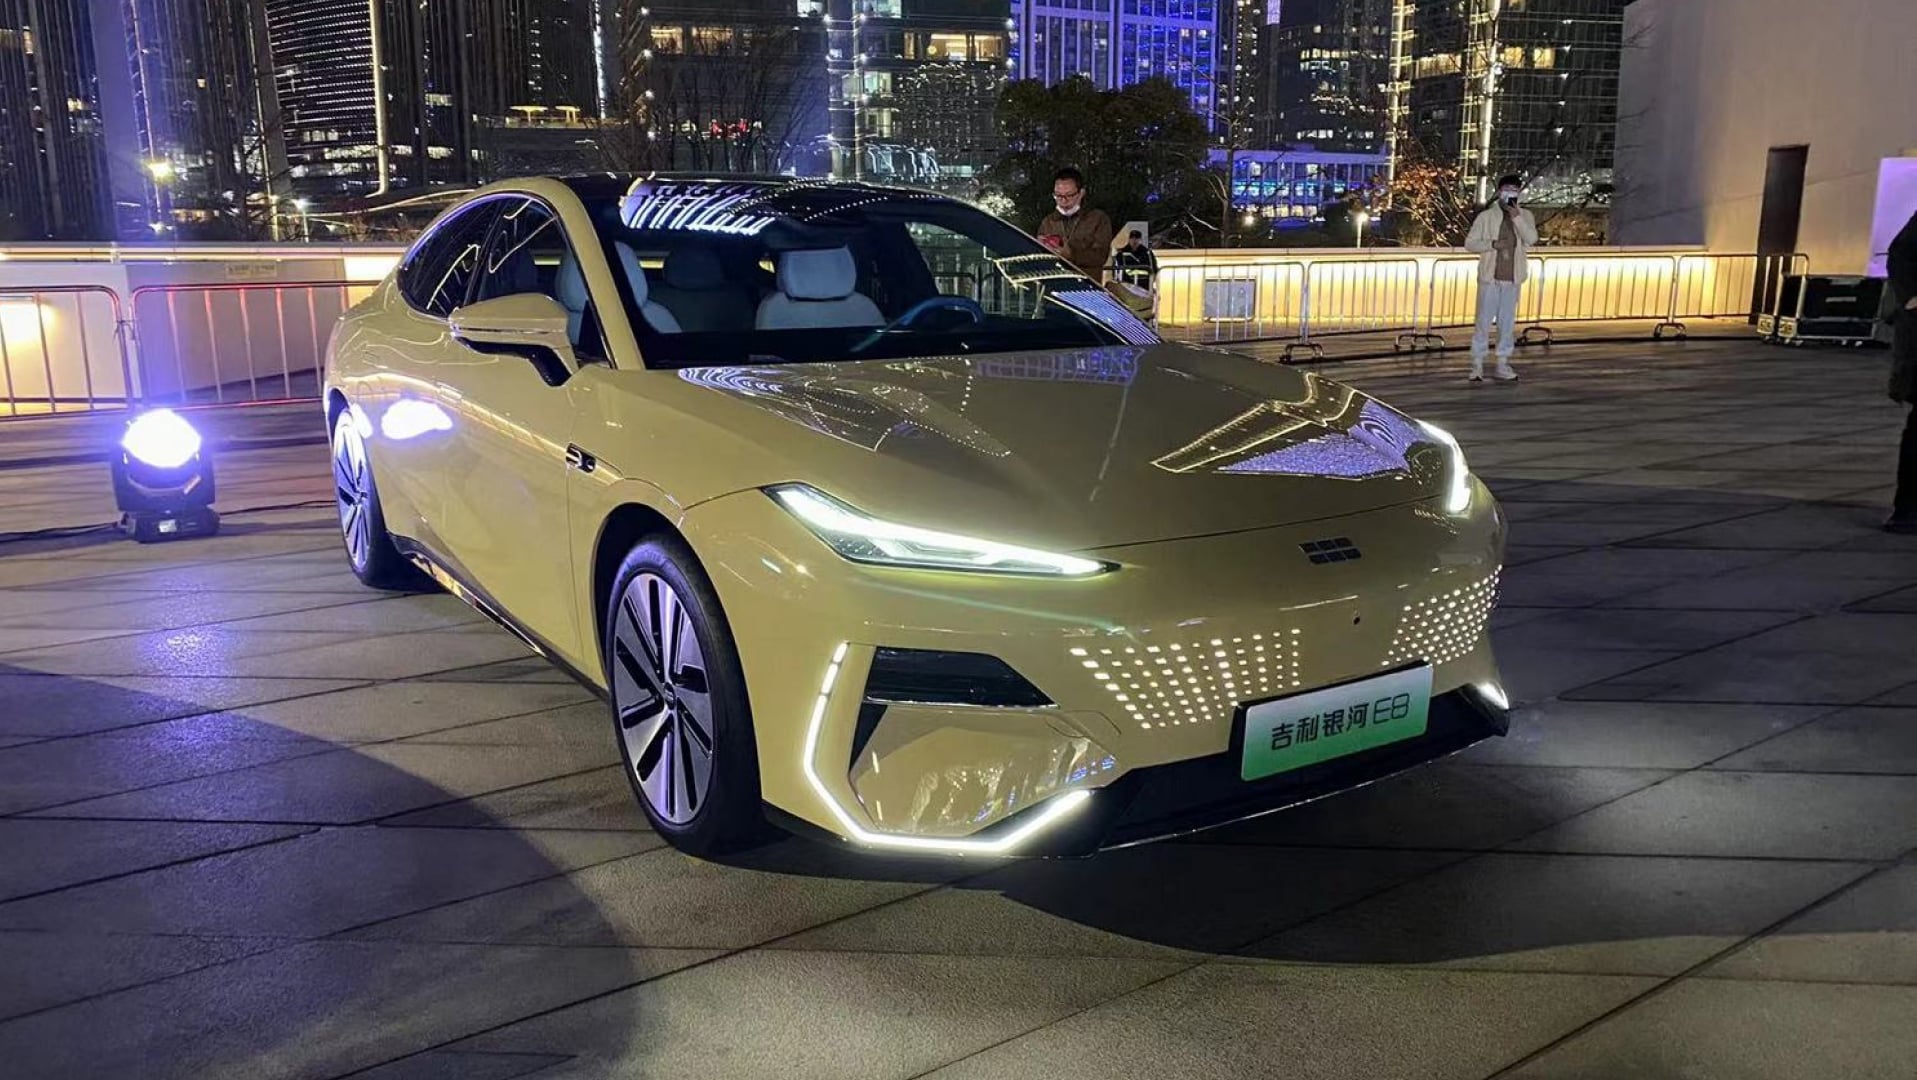 Geely Galaxy E8 entered China with 475kW. Starts at 24,760 USD